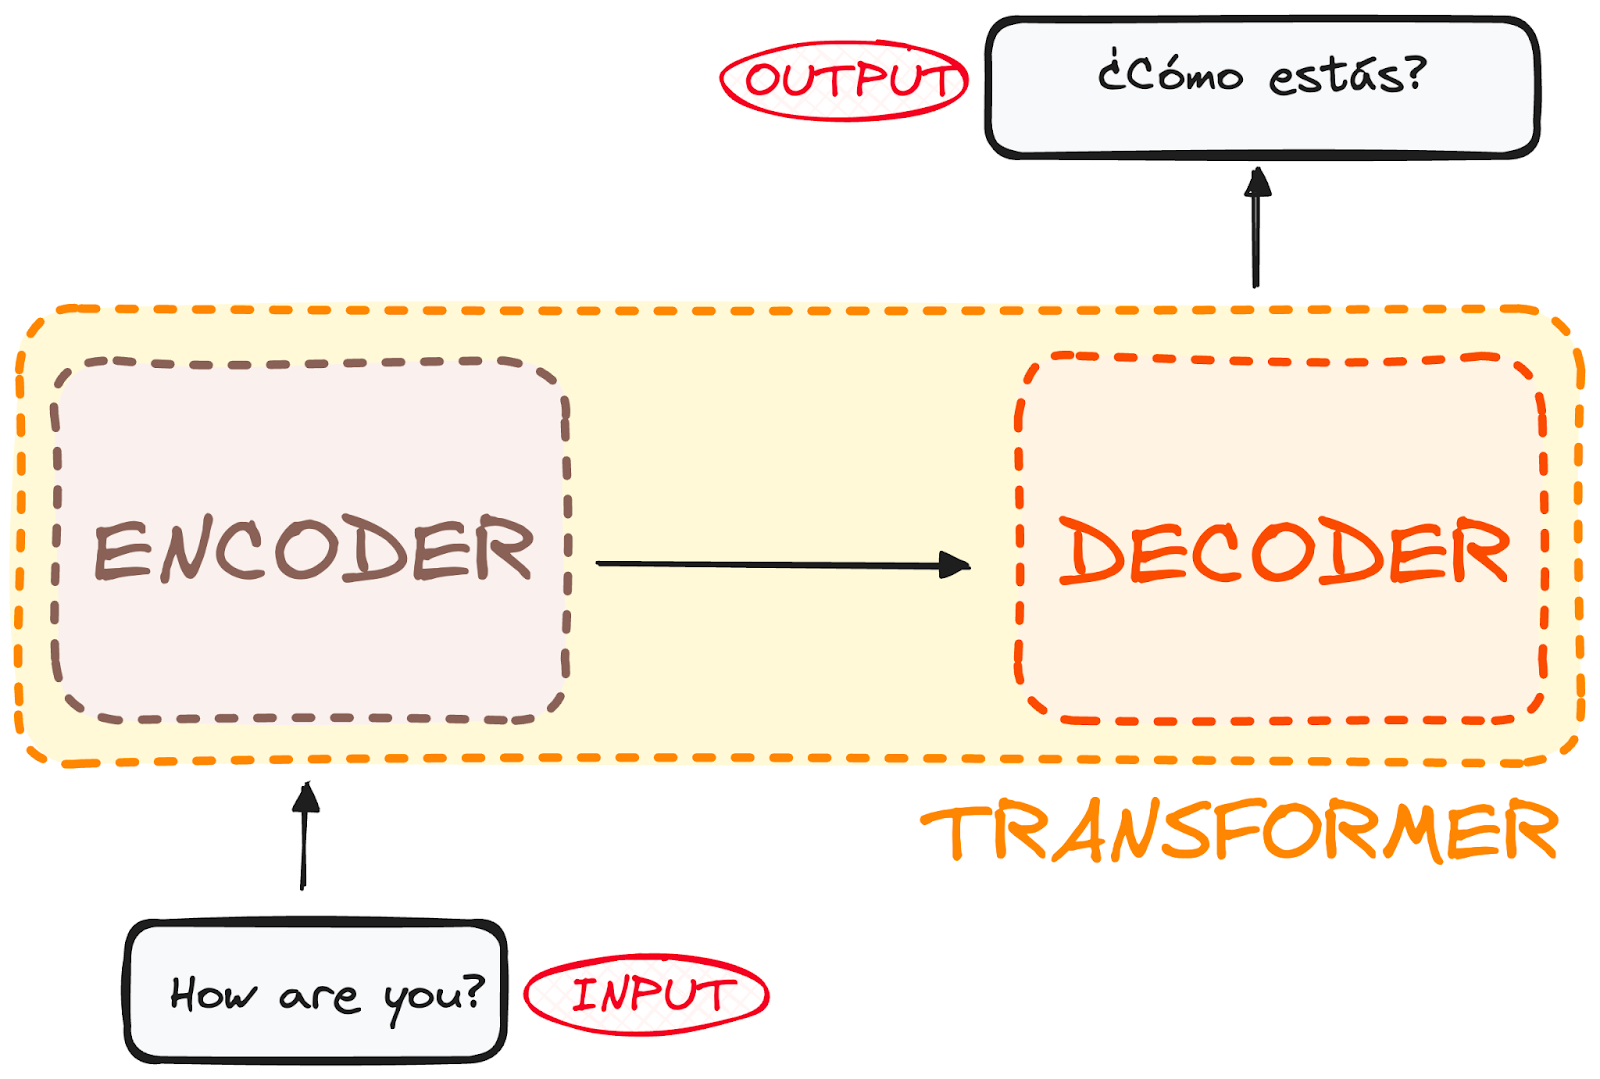 The transformer architecture for language translating with two generic modules (Encoder and Decoder).